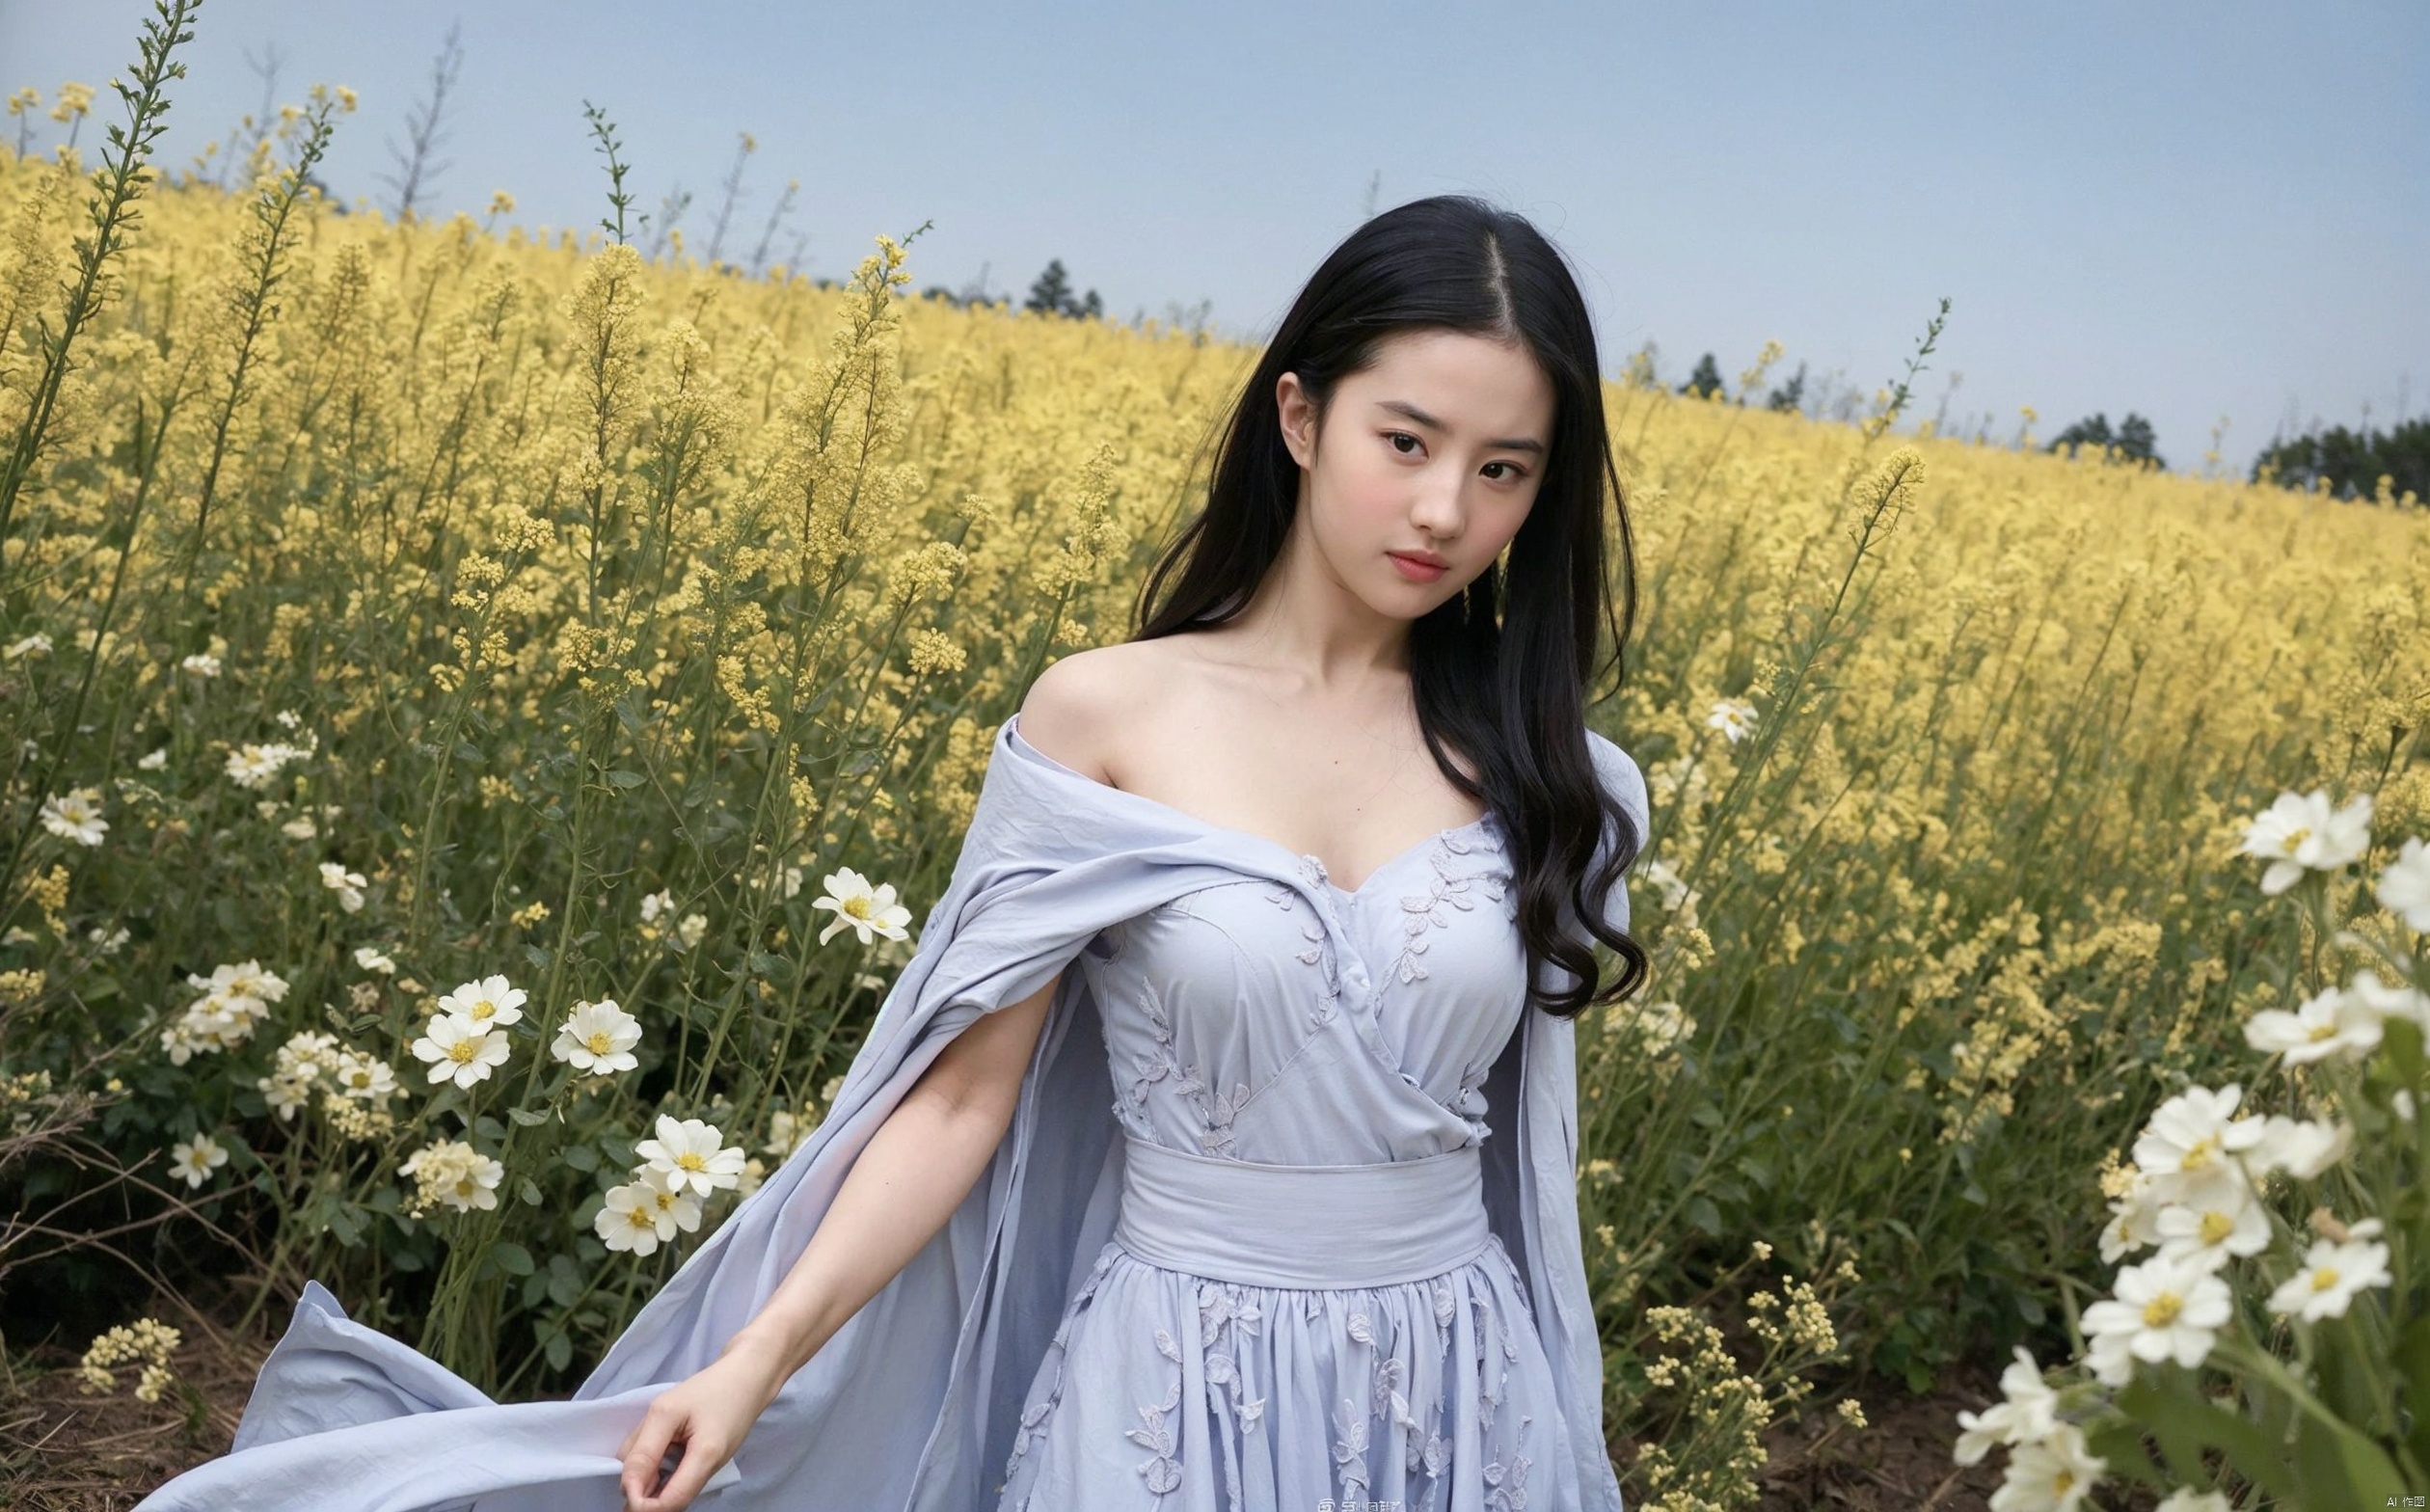  masterpiece, best quality, ultra high res, sexy beauty, slim figure, middle breasts, wearing lace maxi dress；A young girl with a slim figure and a large chest is wearing a long lace dress. She is standing in a field of flowers, with the sun shining on her face. The wind is blowing through her hair, and the flowers are swaying in the breeze. She is looking over her shoulder at the camera, with a seductive expression on her face. The field is filled with a variety of colorful flowers, and the air is filled with the scent of jasmine. The atmosphere is romantic and sensual. The camera is focused on the girl's body, with a shallow depth of field, chenchen, SaayaIrie, jiaxin, tong, tongtong, yanba, zuo, xiaoyuer, xueping, hongzhenyin, nana, xiaowen, chuxi, yangmi, xuemei, chunchun, mojing, xiaonizi, jiejing, xiaofei, xueli, lianhua2.0, lingsha, ajuan, mengqi, rela, hongxia, quanzhen, tianxiu, zhangling, wuyun, vivian chow, caishaofen, cx, liuyife